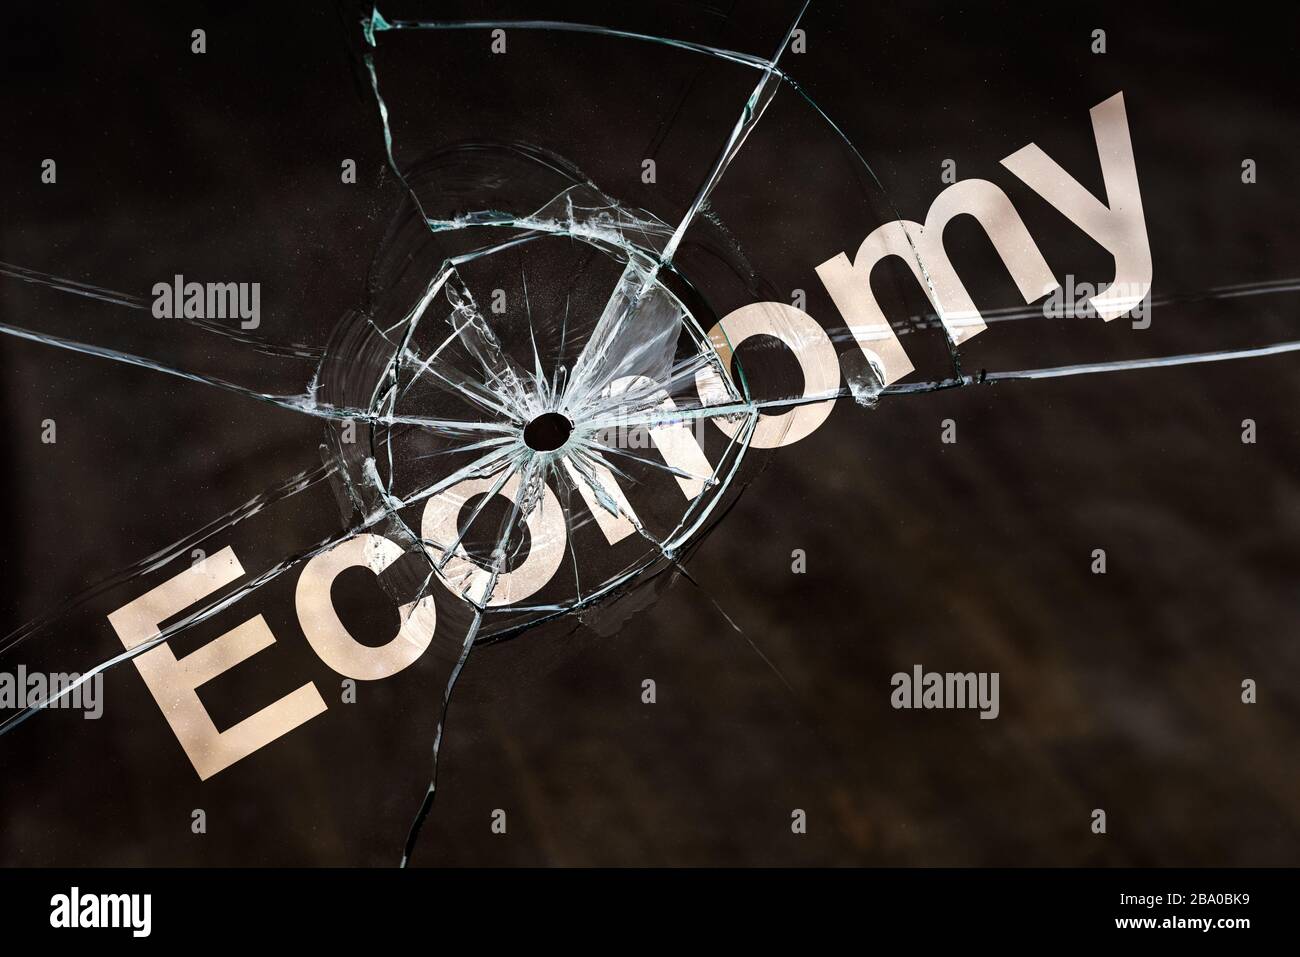 World financial crisis and collapse of the global economy Stock Photo